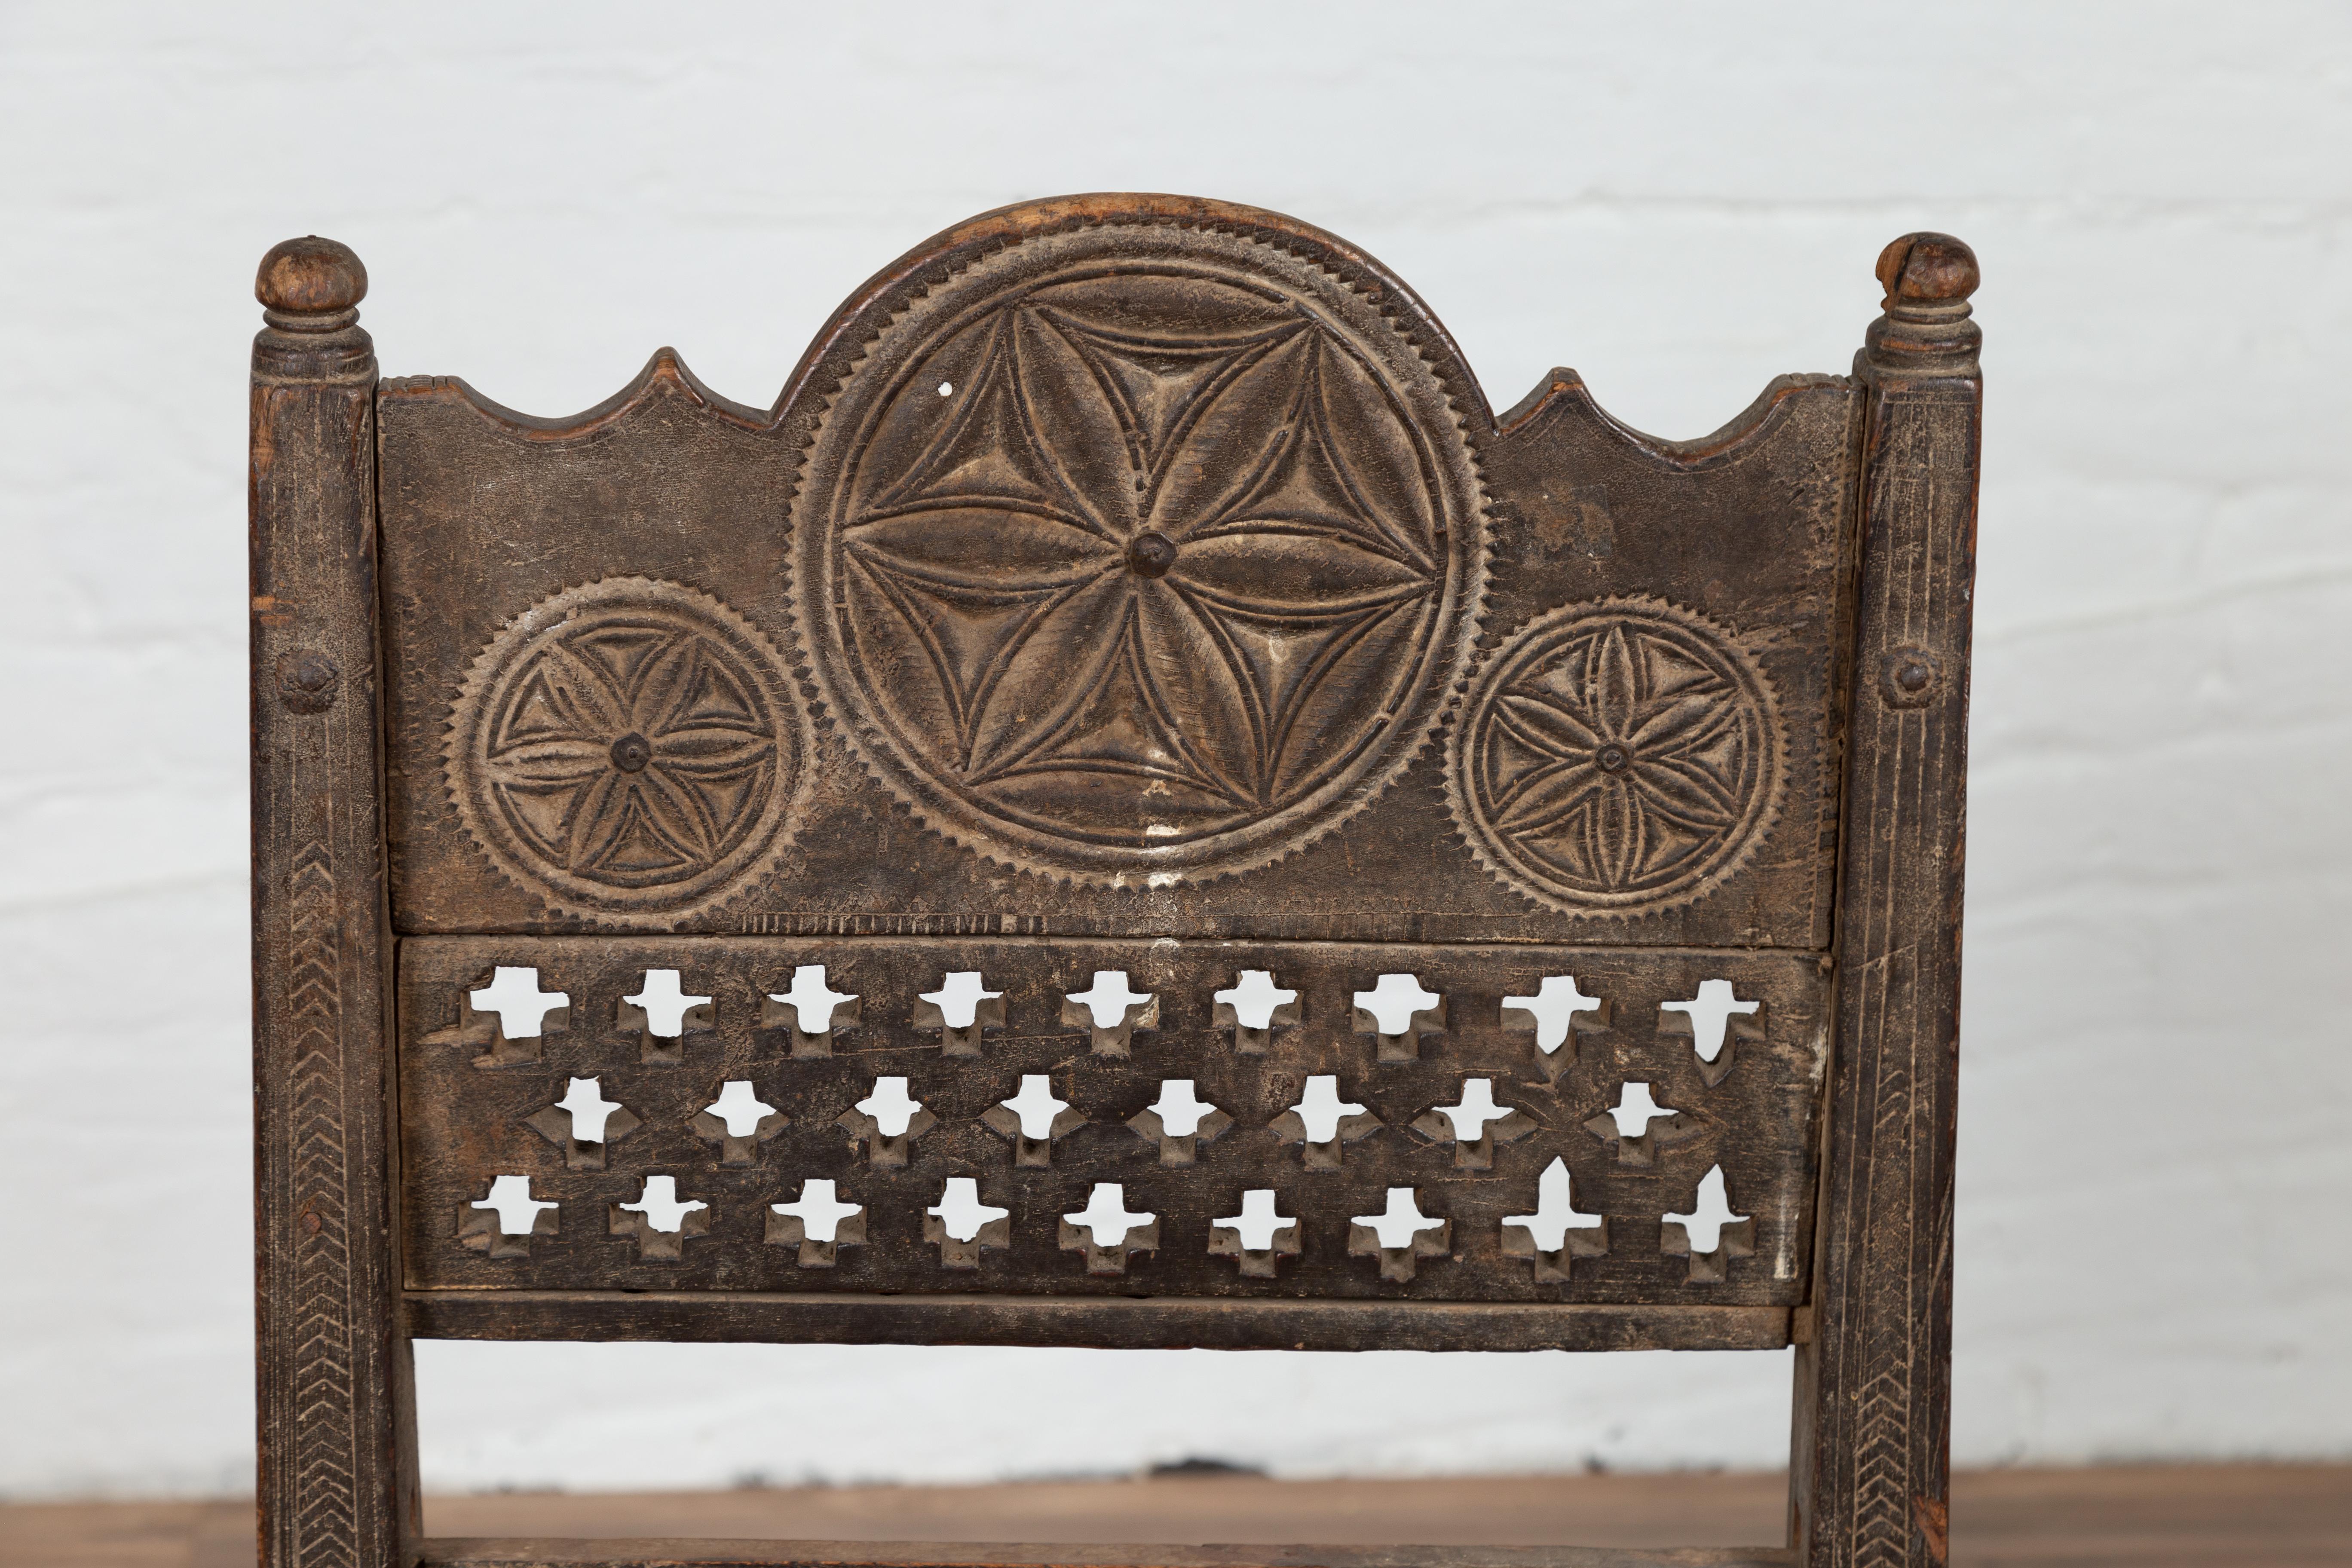 Antique Indian Rustic Low Seat Wooden Chair with Fretwork Accents and Rosettes For Sale 6